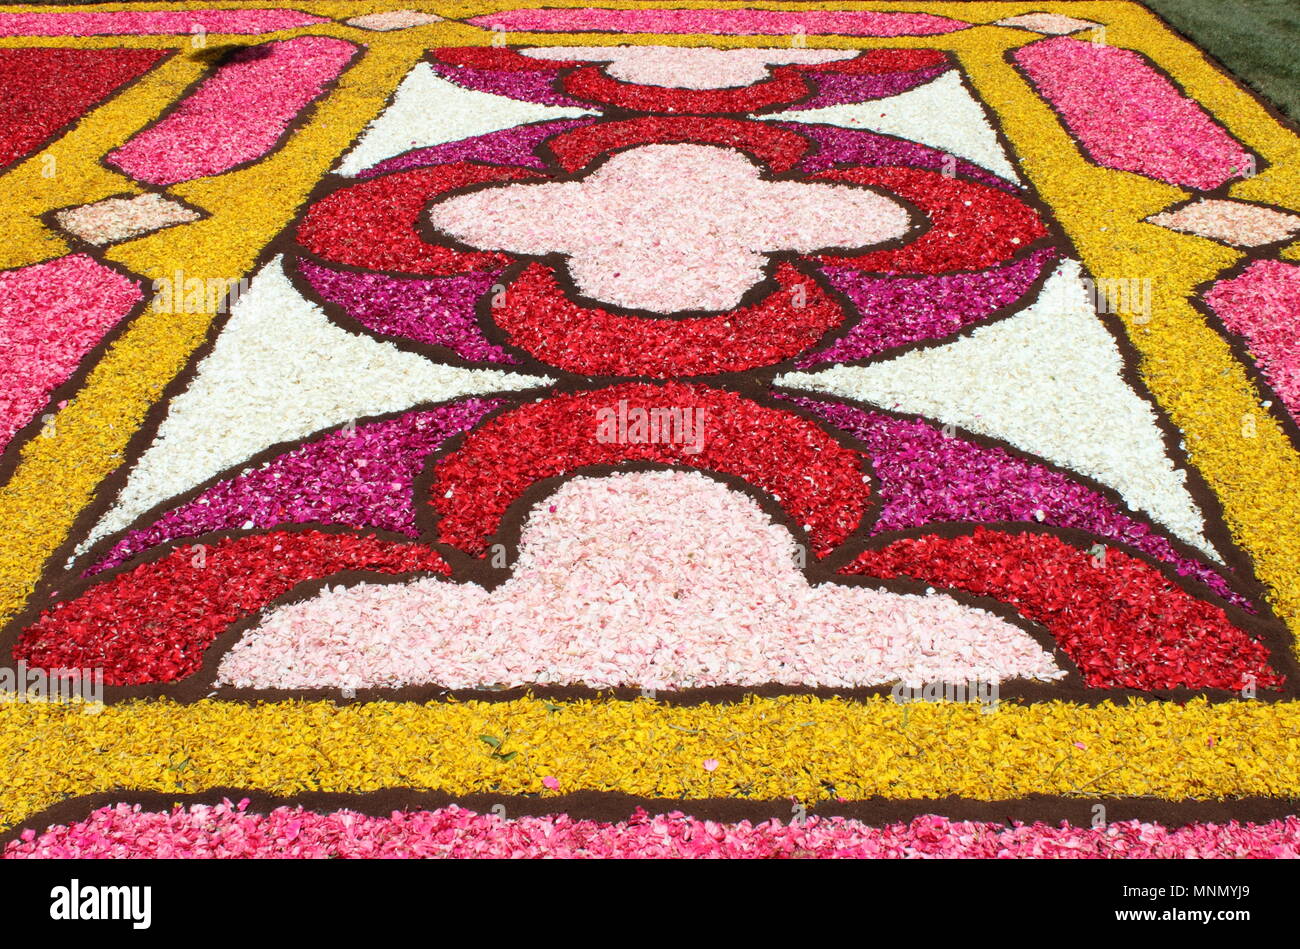 GENZANO, ITALY - JUNE 18: Floral Carpet in the Main Street on June 18, 2017 in Genzano, Italy. This event takes place every year and almost 350.000 fl Stock Photo